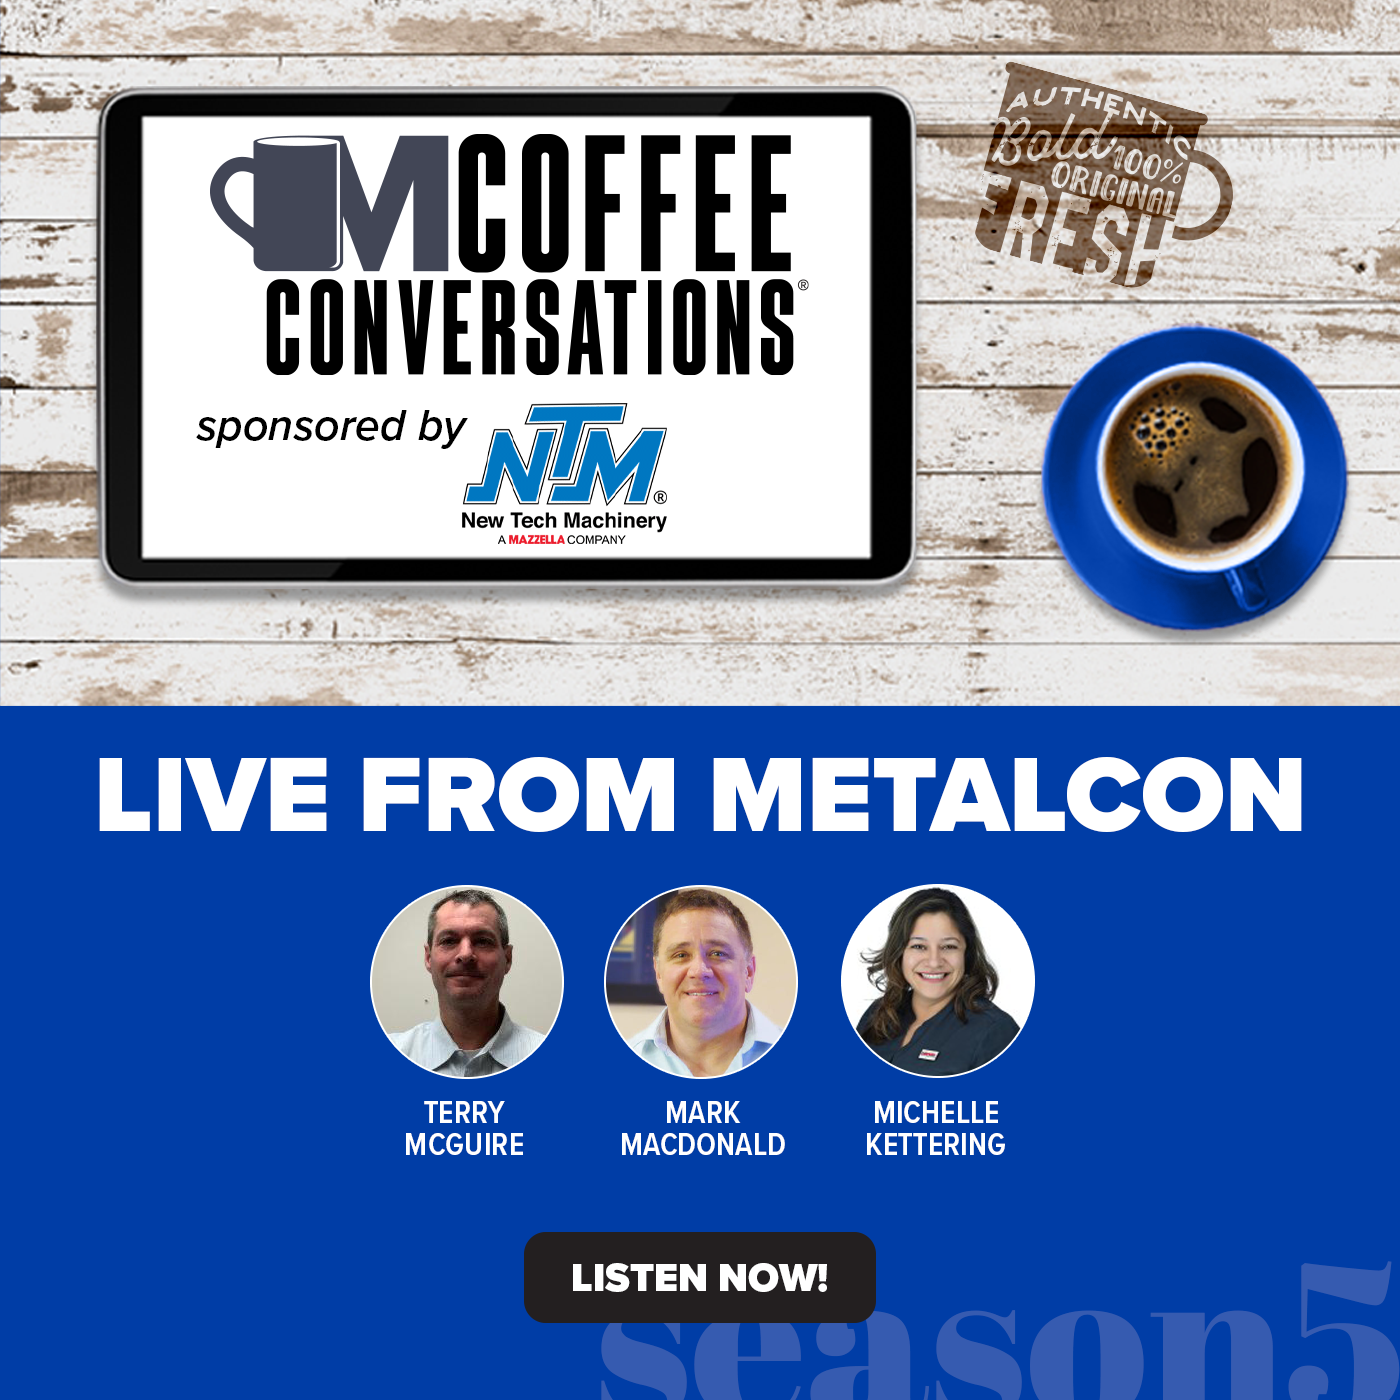 NTM - Coffee Conversations LIVE From METALCON 2023 Sponsored by New Tech Machinery! - POD